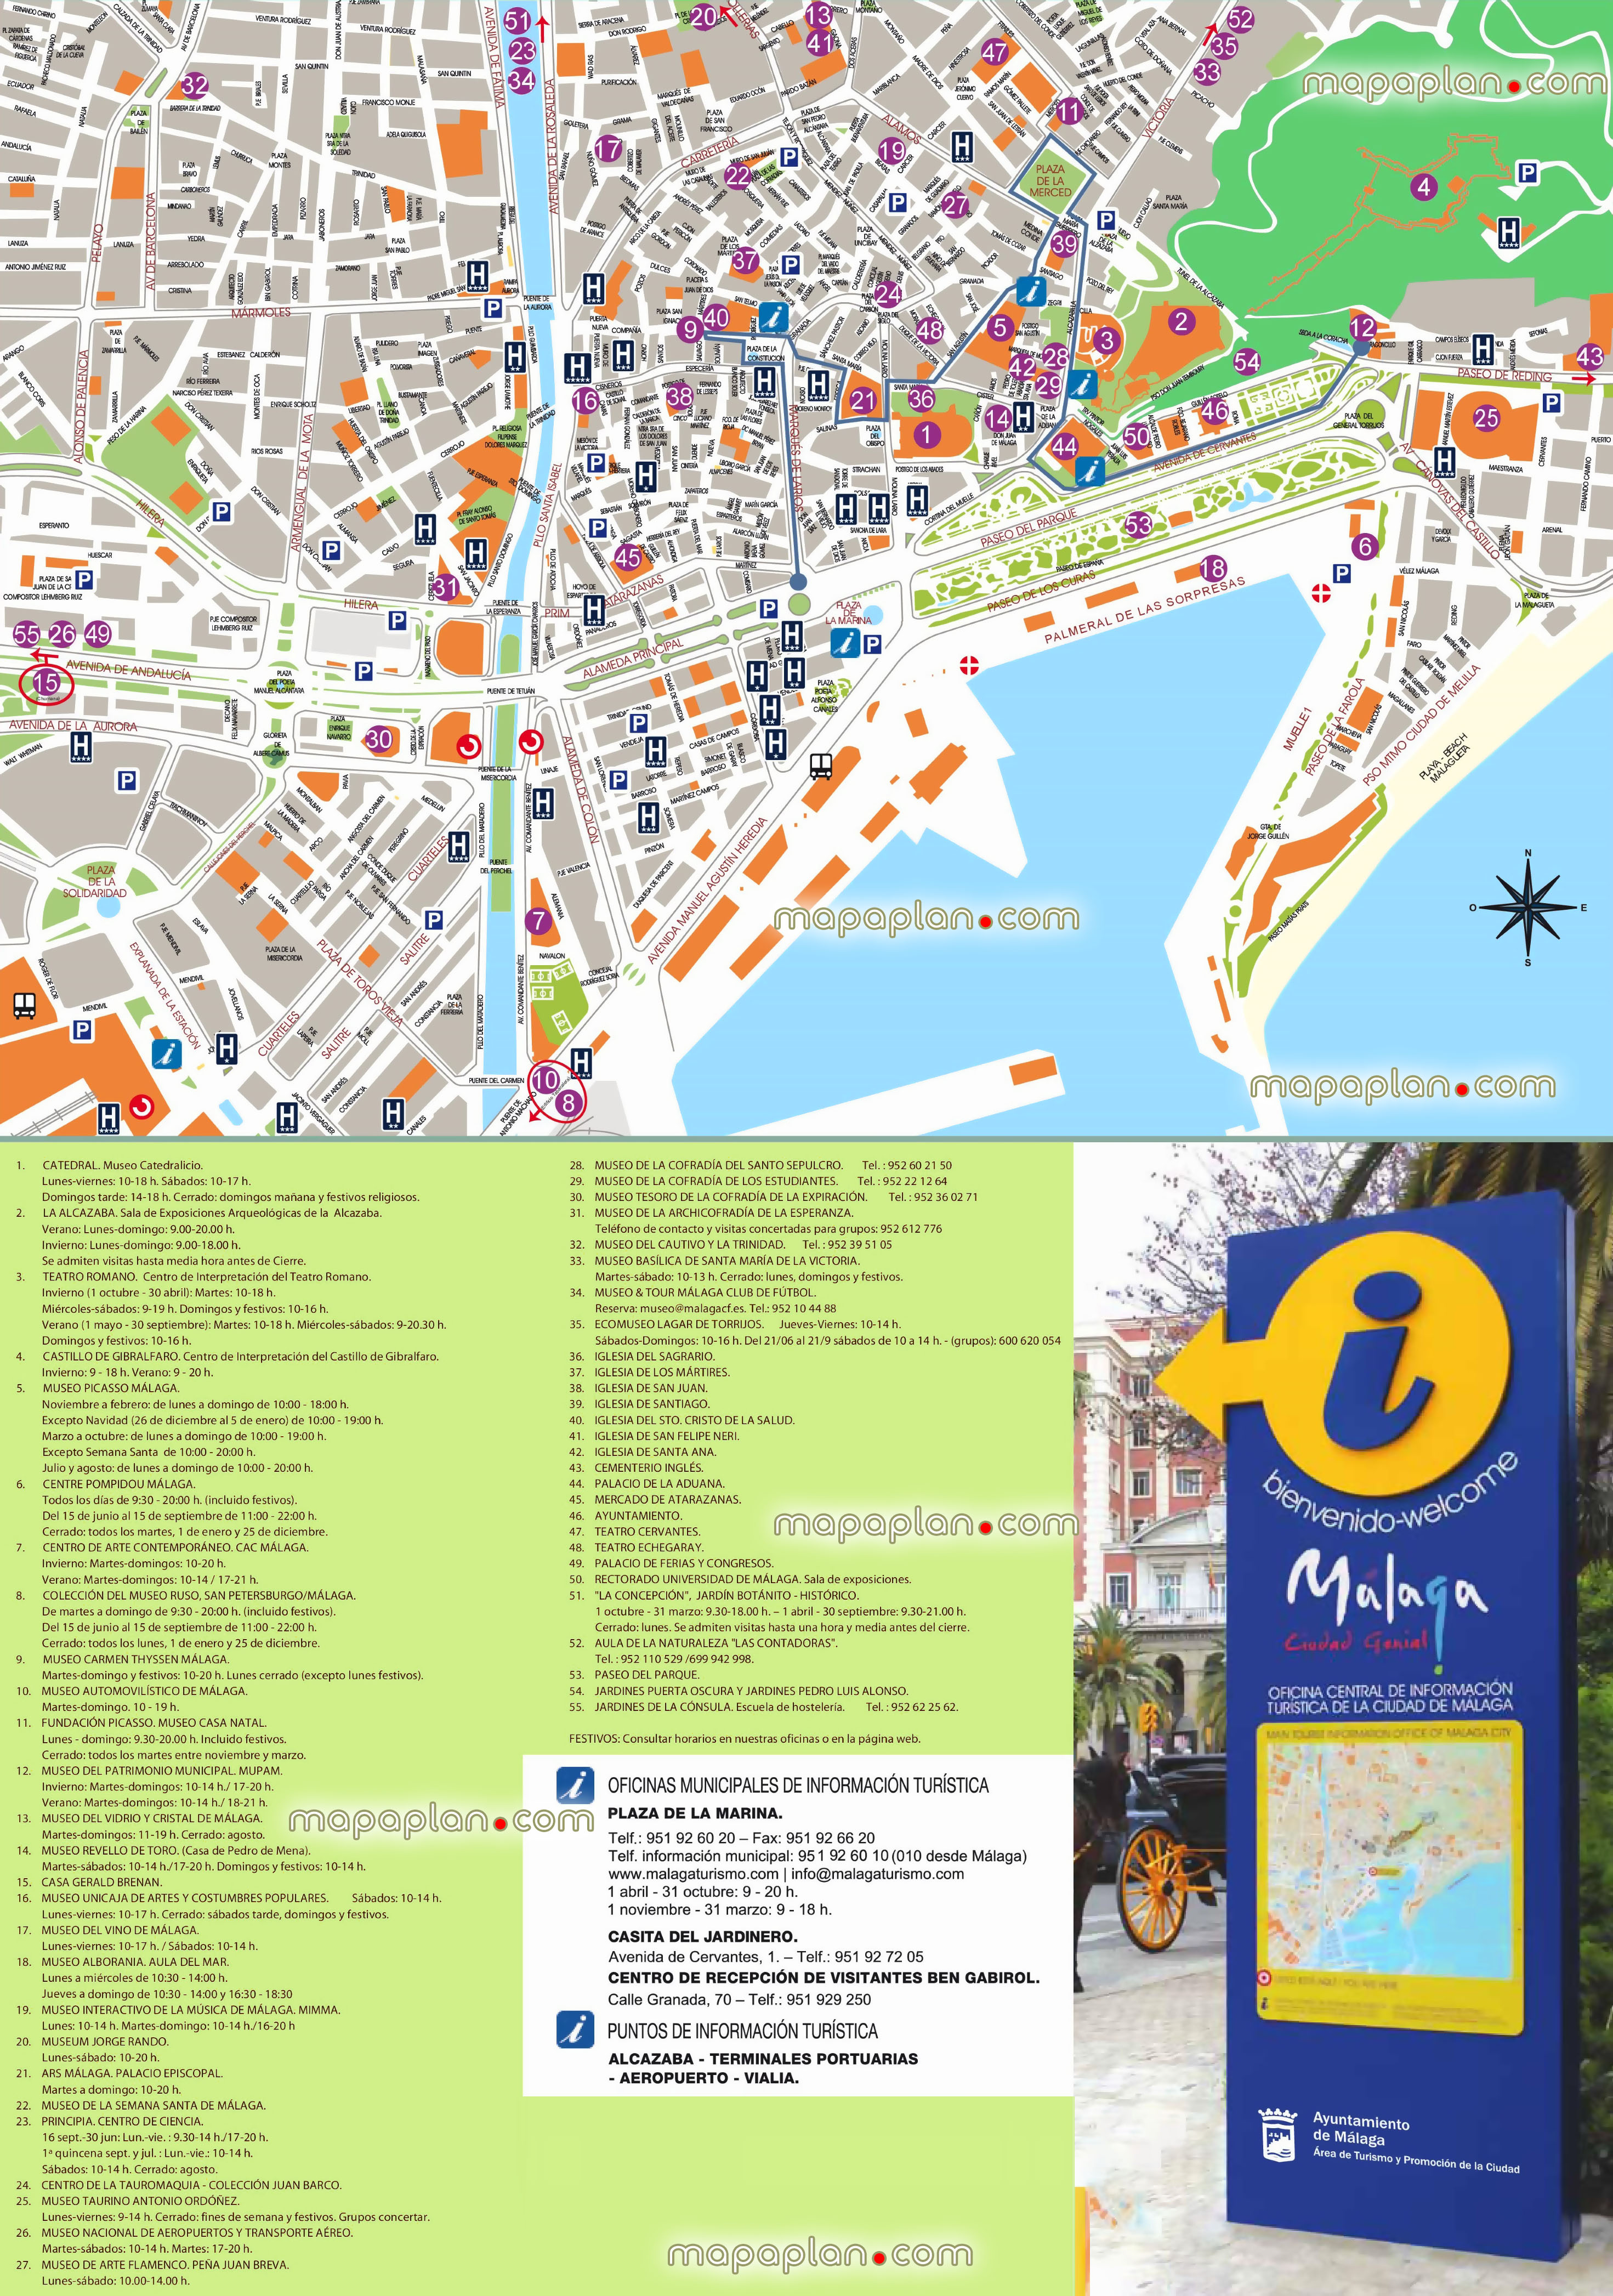 malaga detailed printable download tourist information city ciudad centre sightseeing old town tour poster guide itinerary planner layout best things do favourite attractions points interest visit tourists